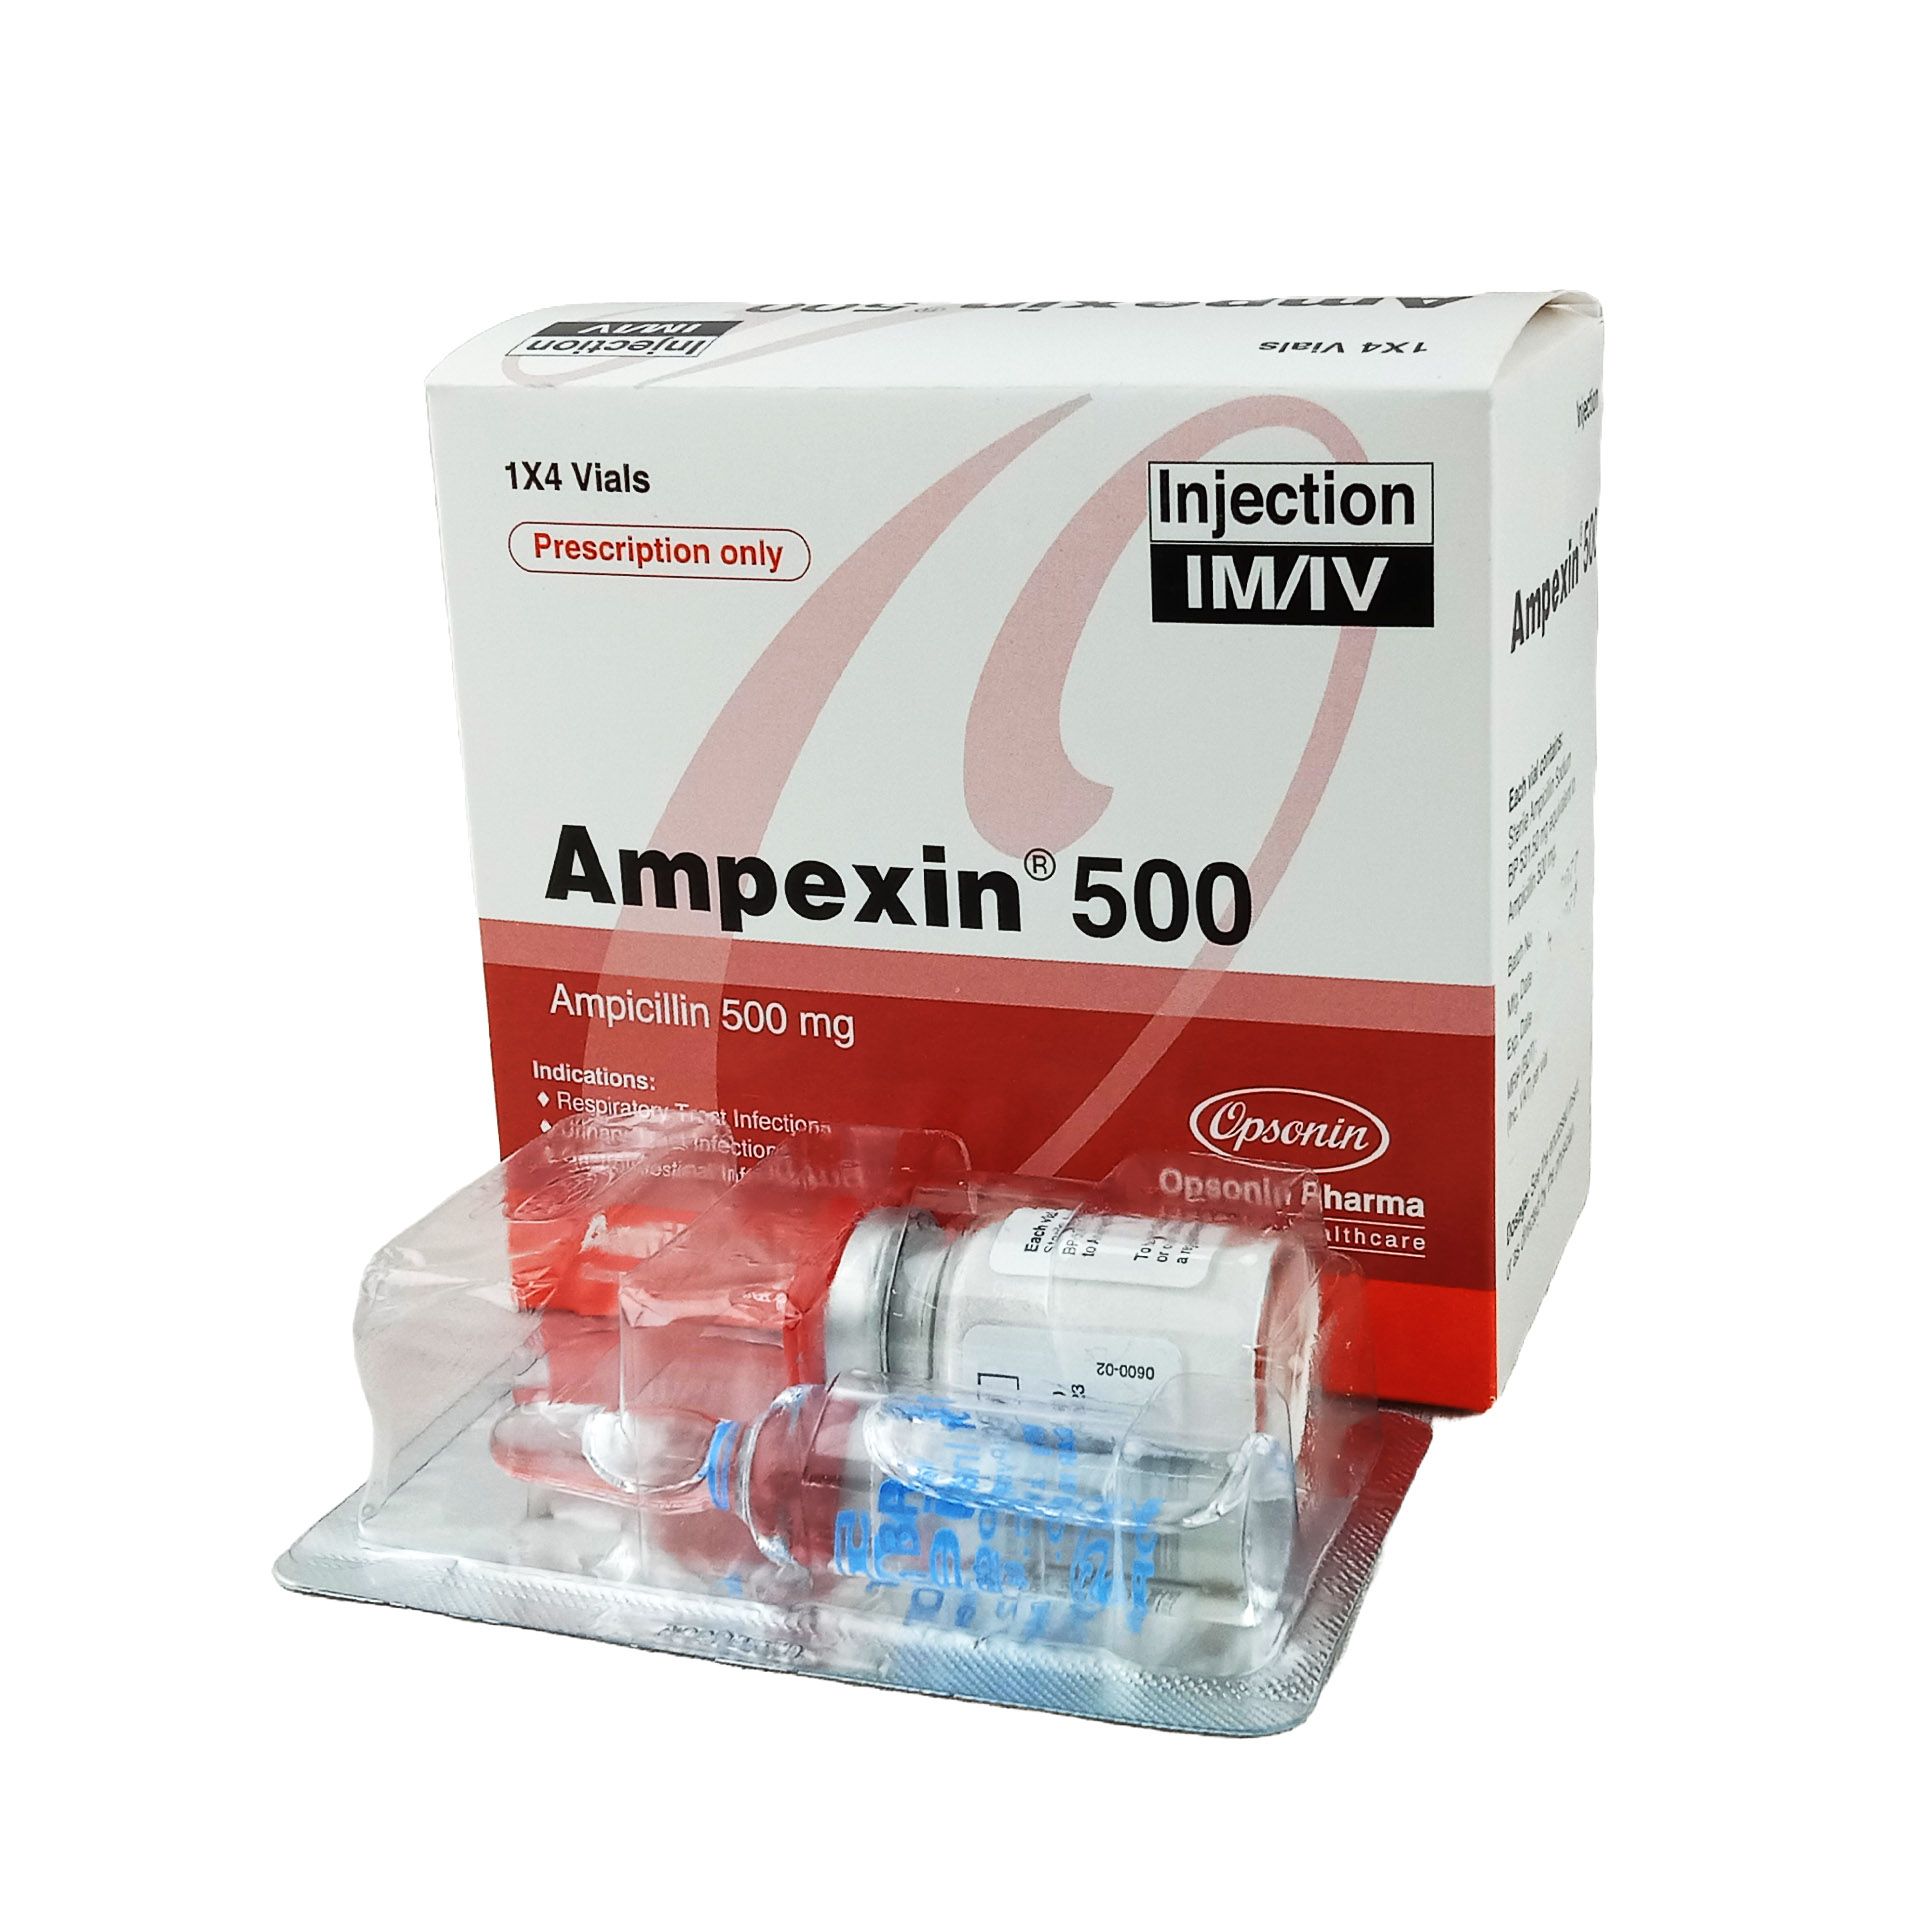 Ampexin IV/IM 500mg Injection